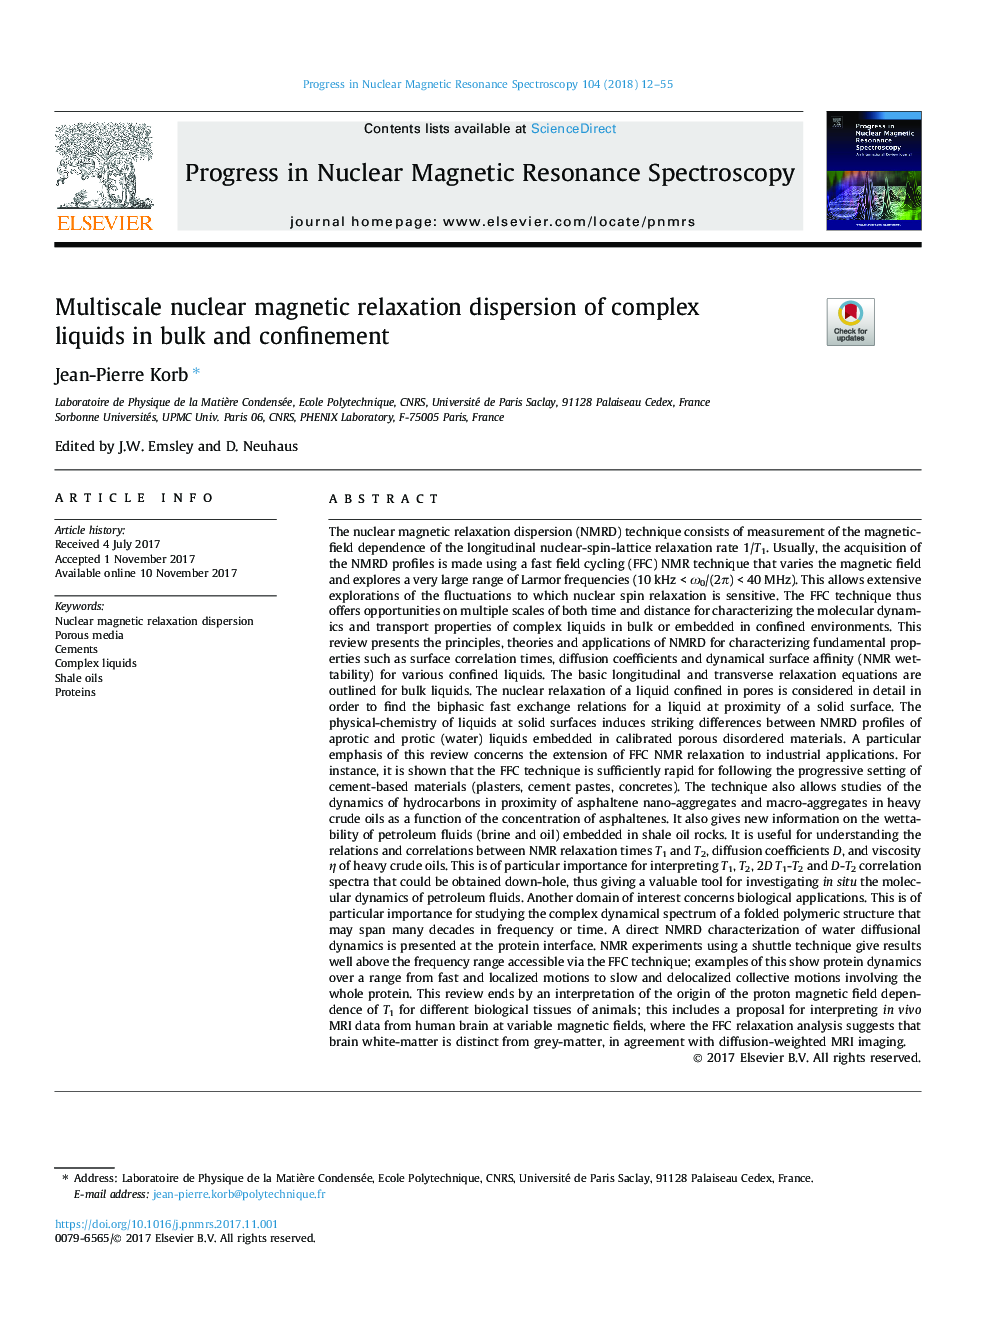 Multiscale nuclear magnetic relaxation dispersion of complex liquids in bulk and confinement